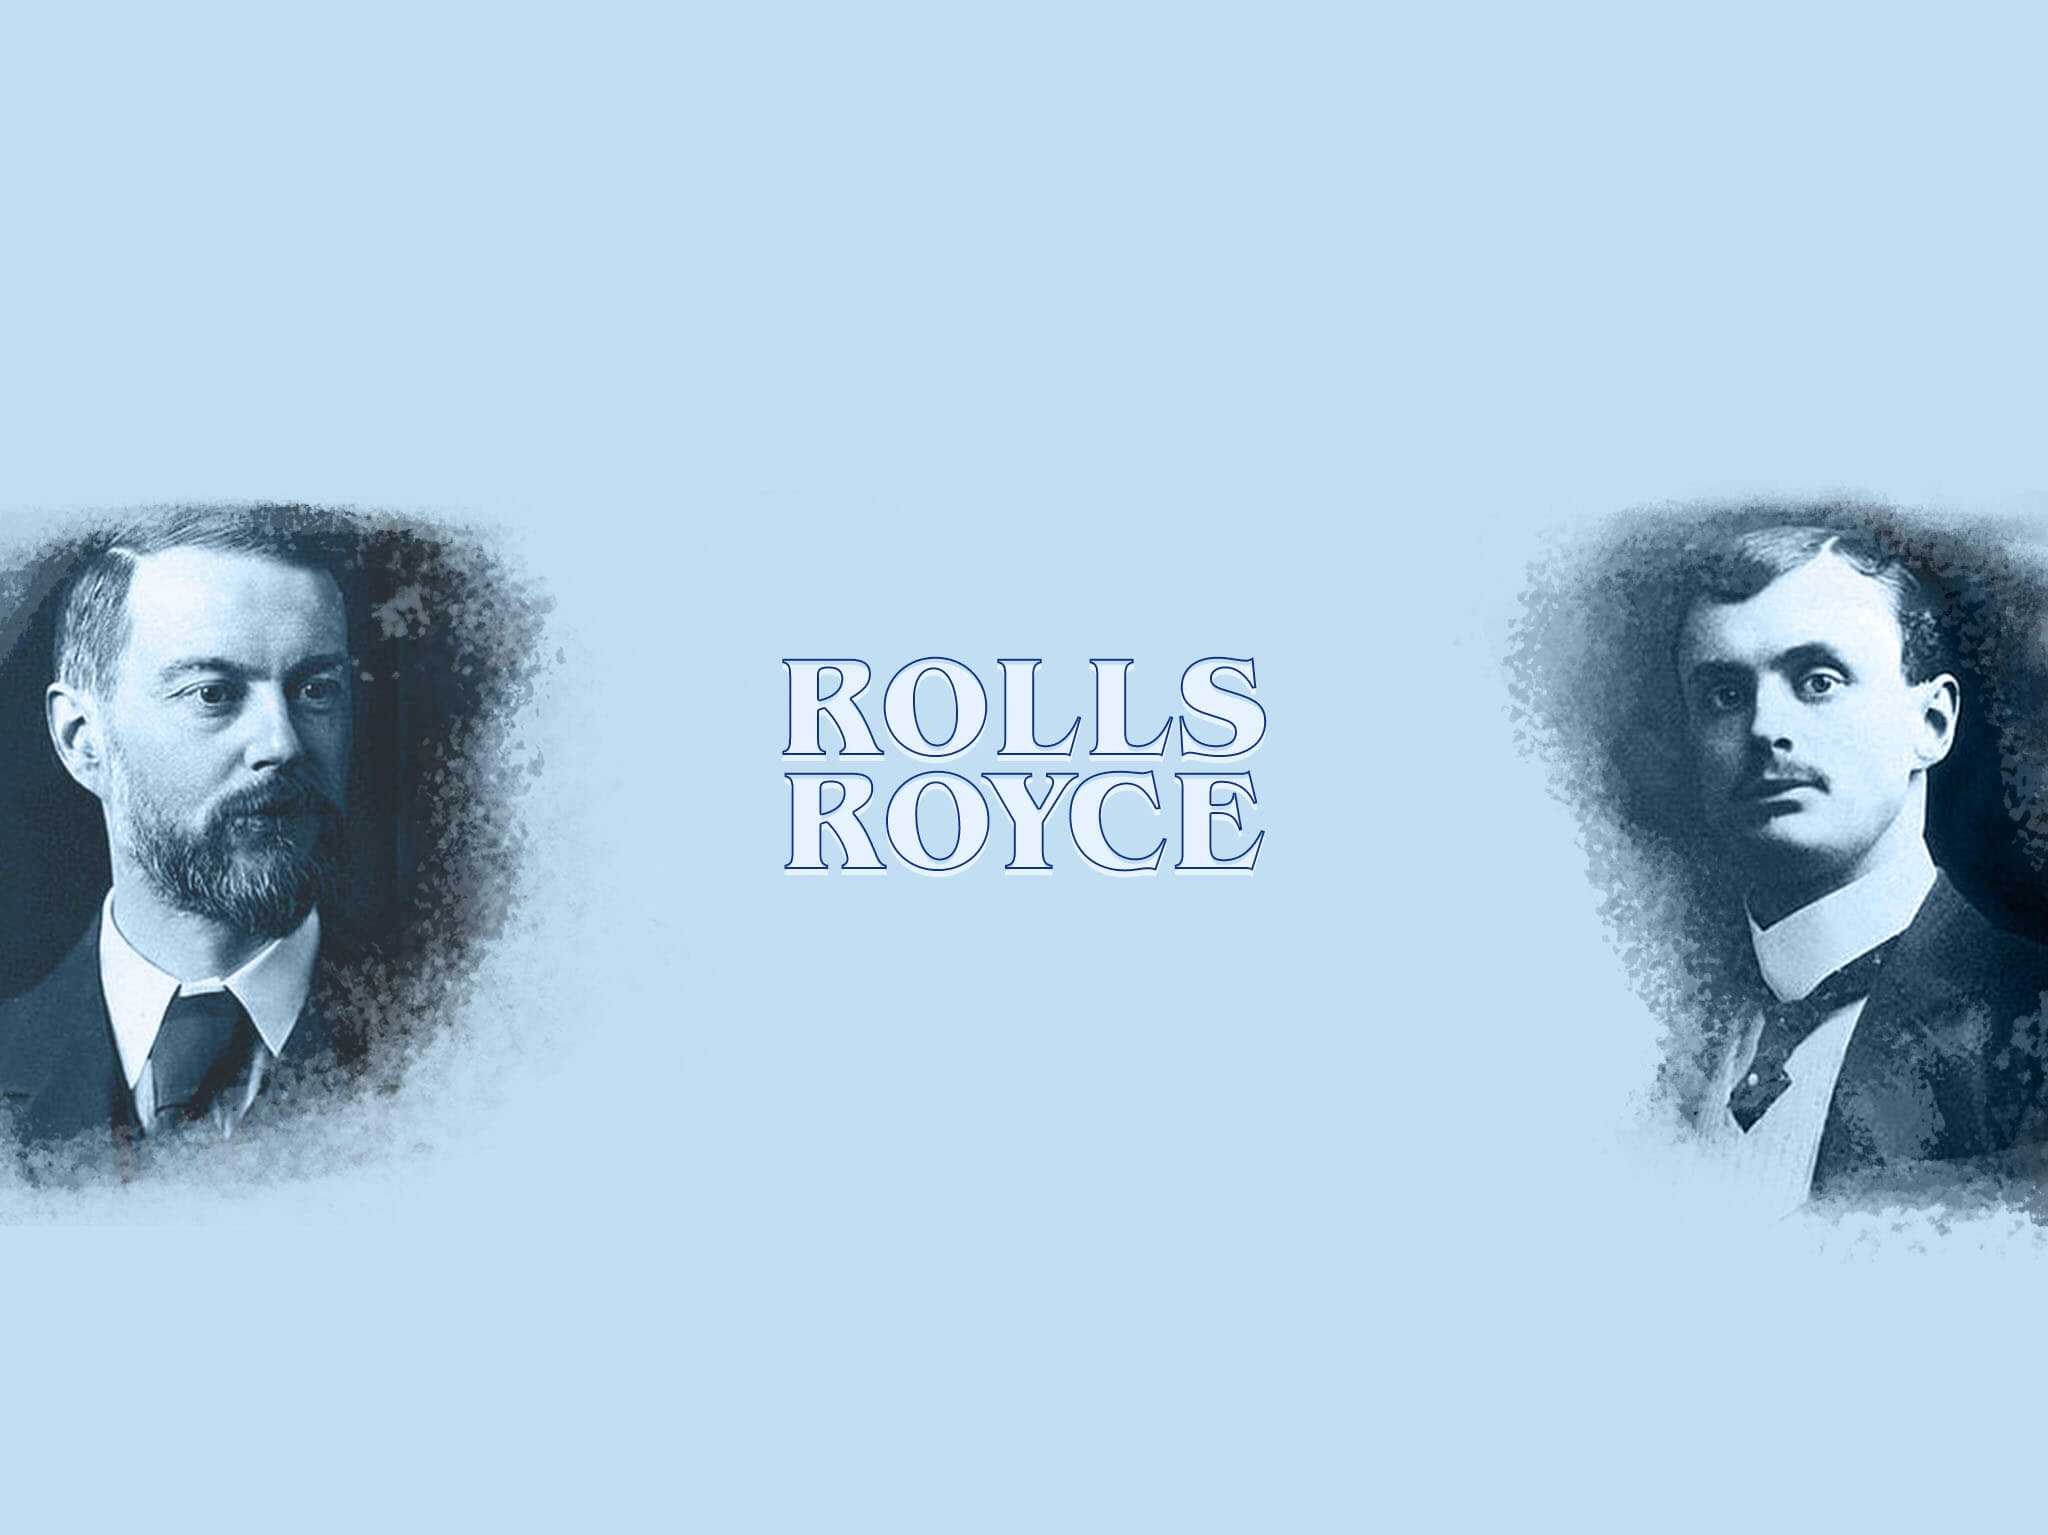 Charles Rolls and Henry Royce